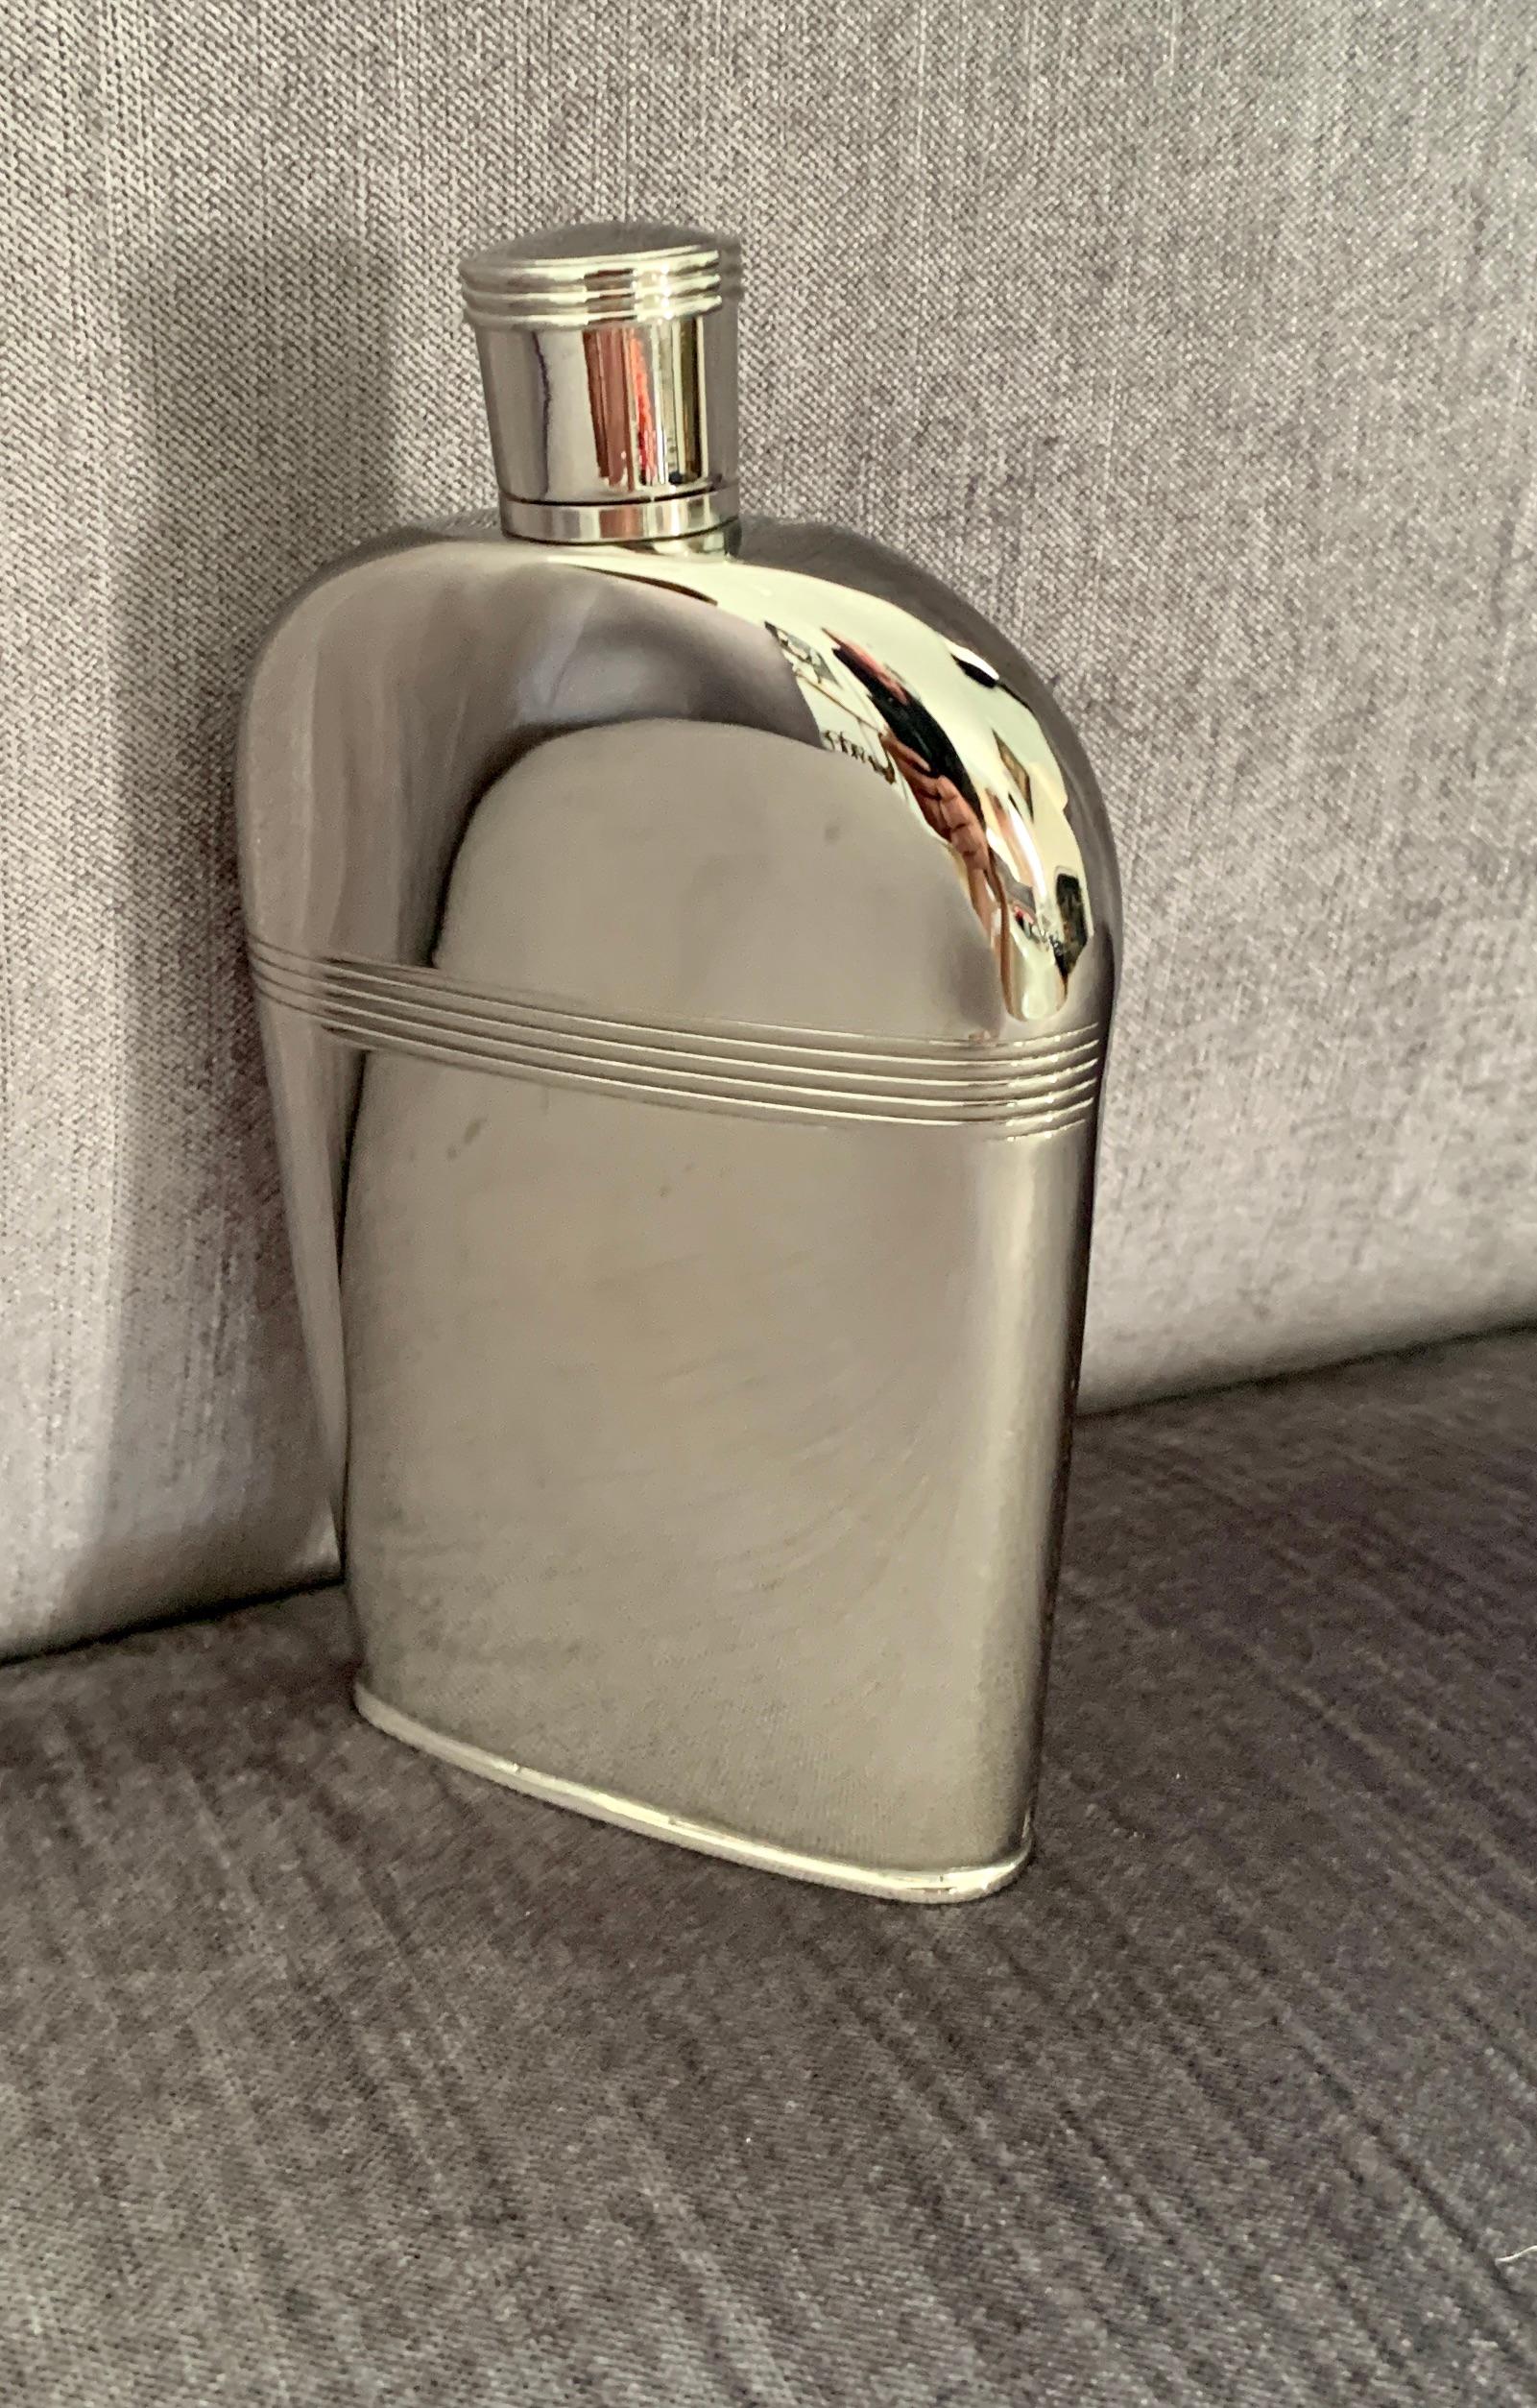 Polished Reed & Barton Silver Plate Flask